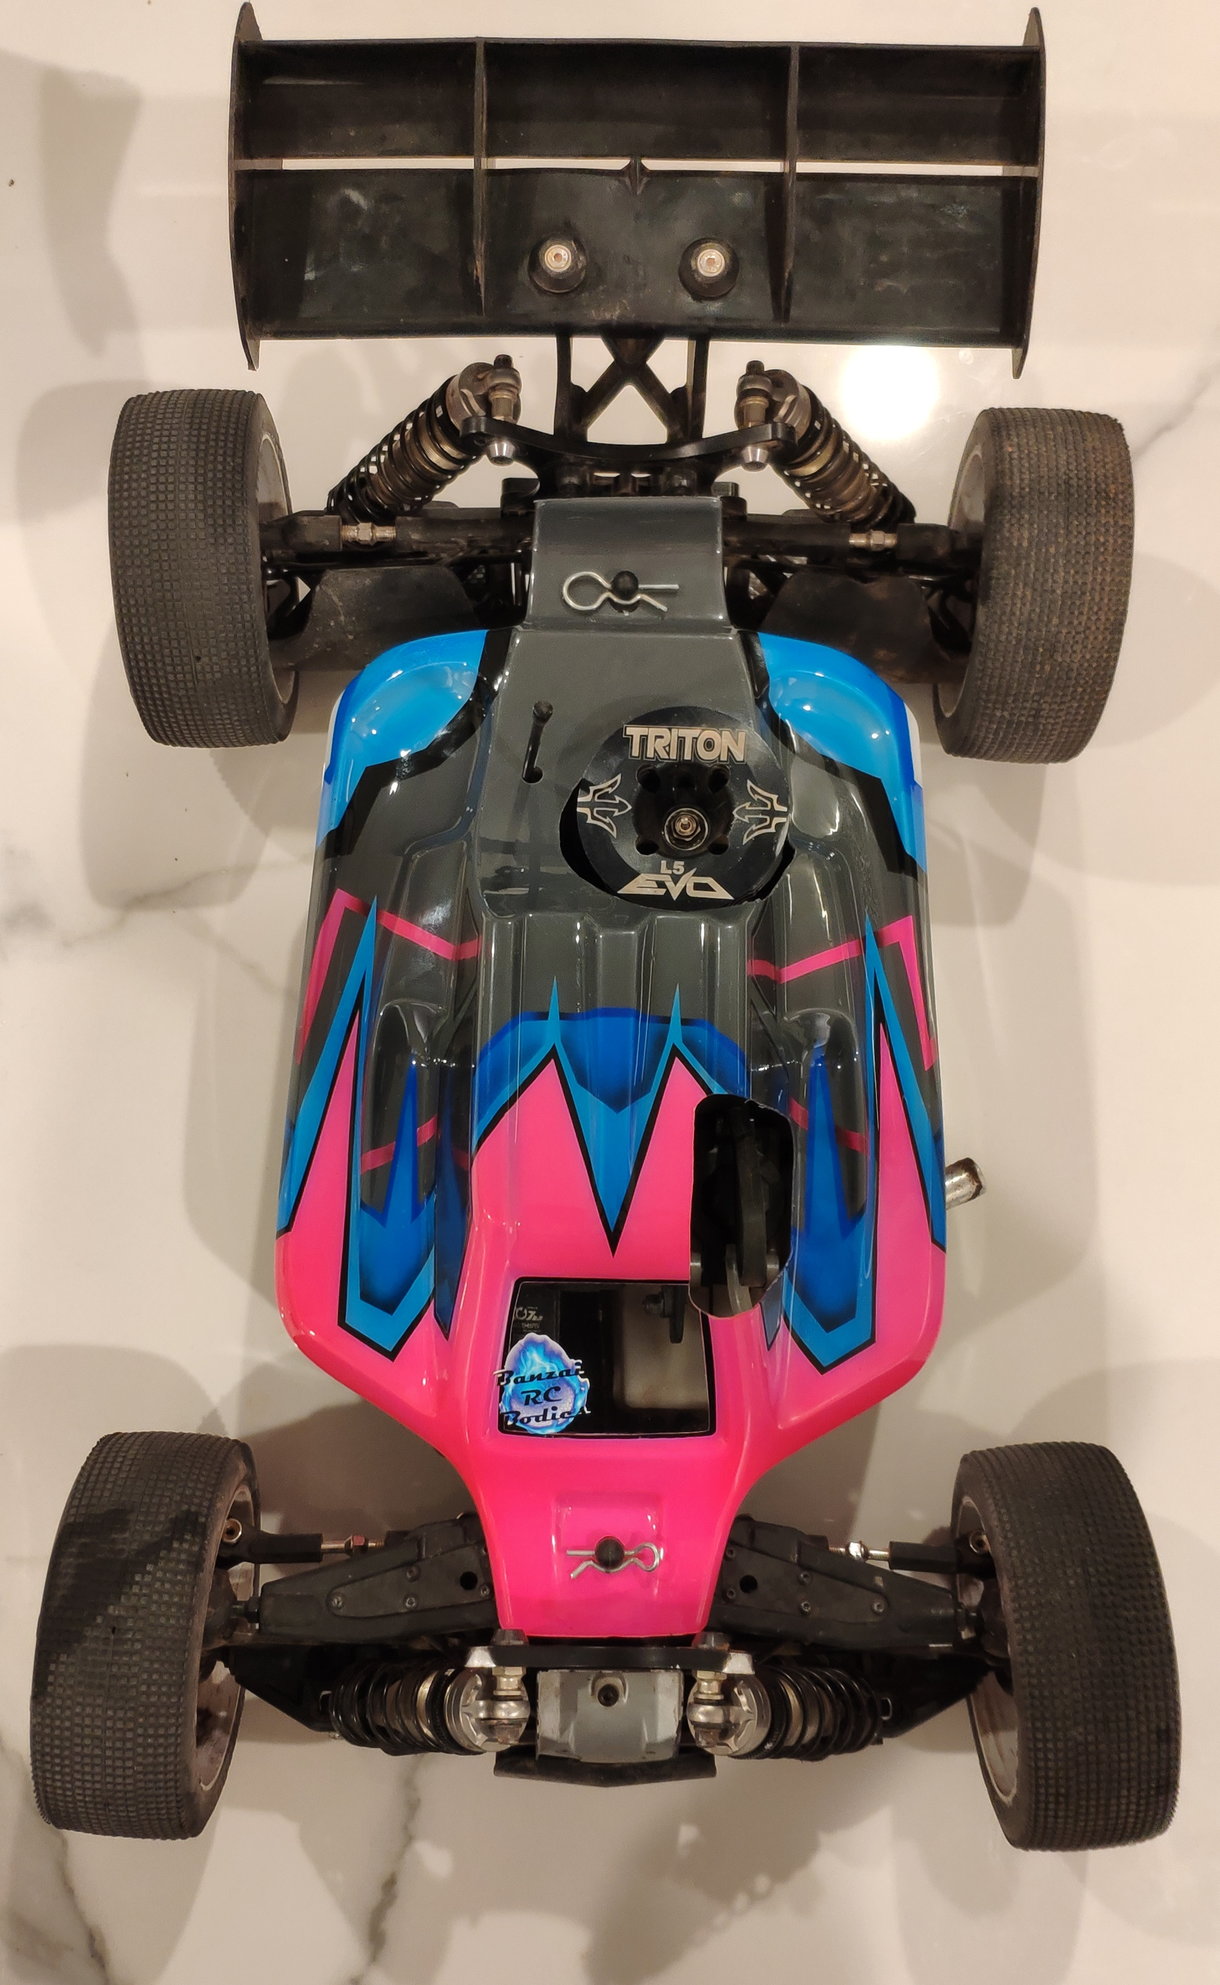 🤙New RC Buggy Drop! Presenting the Kraze - go krazy on or off track 🎉  With upgraded Aluminium swing arm sets as stock for better handling and an  S540